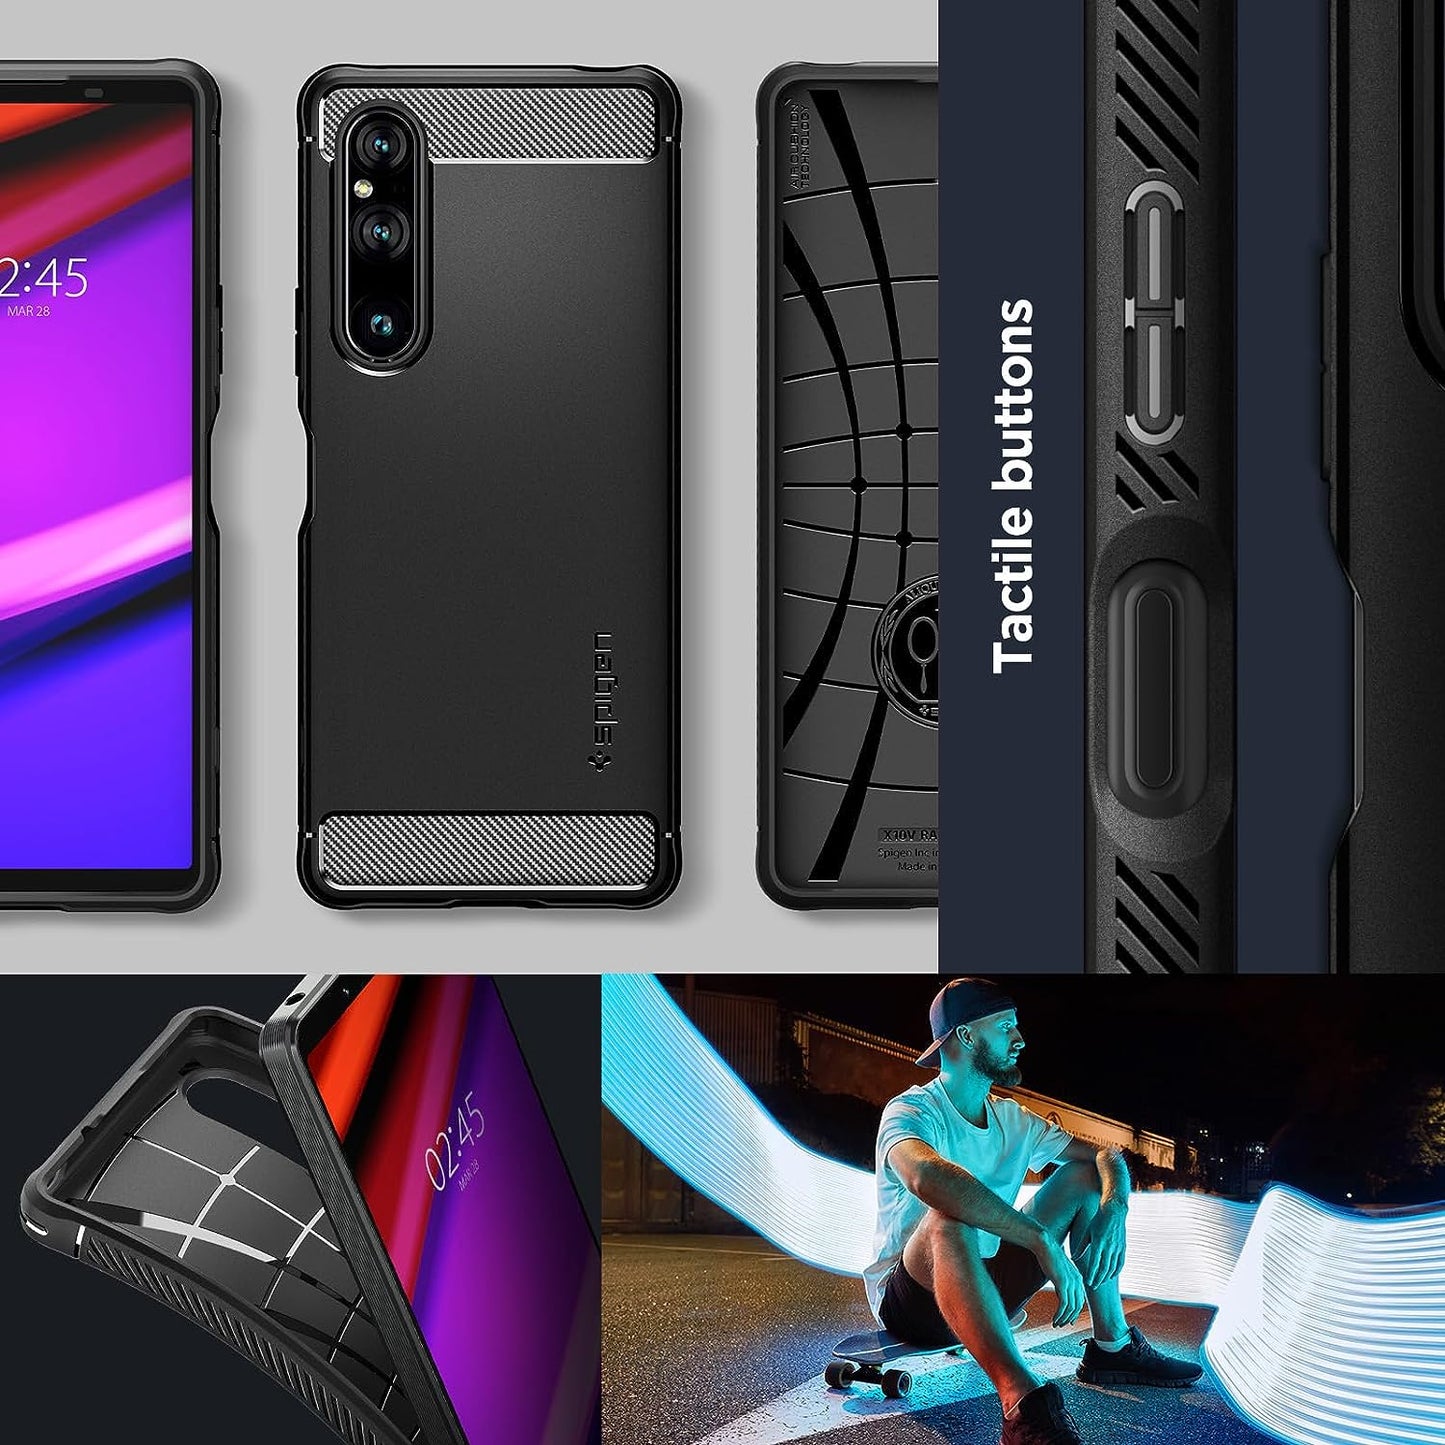 Spigen Rugged Armor Matte Black Case - For Sony Xperia 1 V - mosaccessories